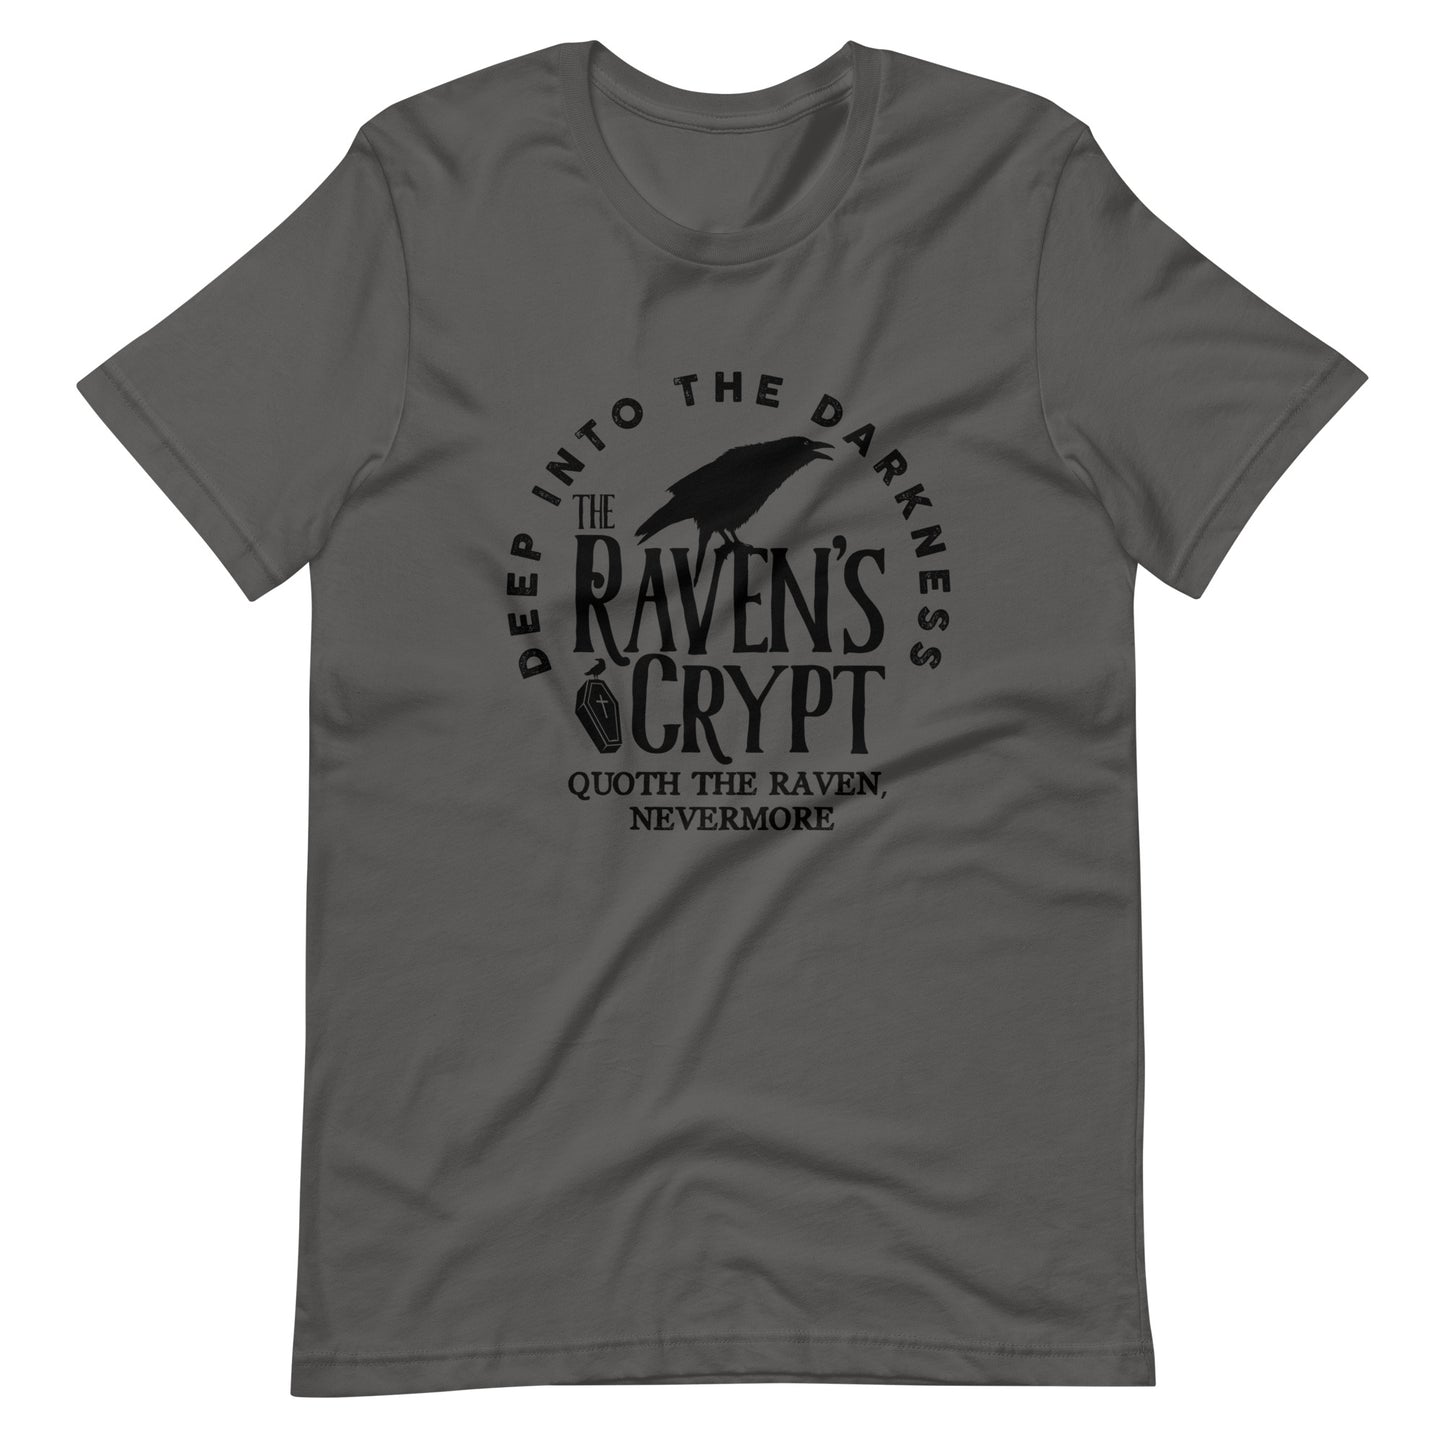 Deep Into the Darkness The Raven's Crypt - Men's t-shirt - Asphalt Front